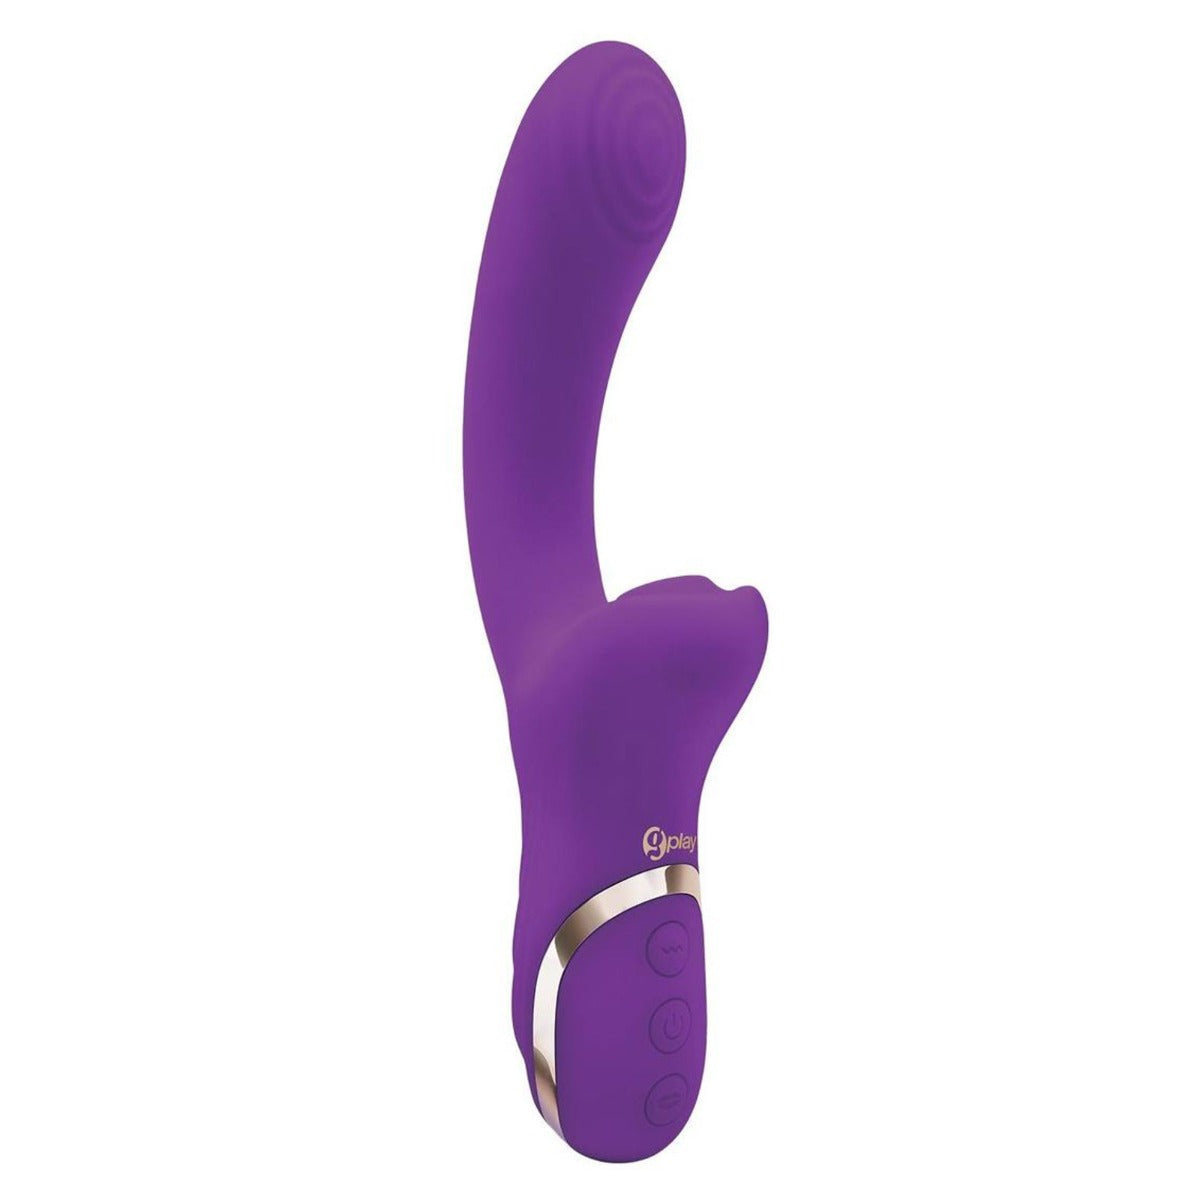 Bodywand G-Play Squirt Trainer G-Spot And Clitoral Suction Vibrator Purple - Simply Pleasure